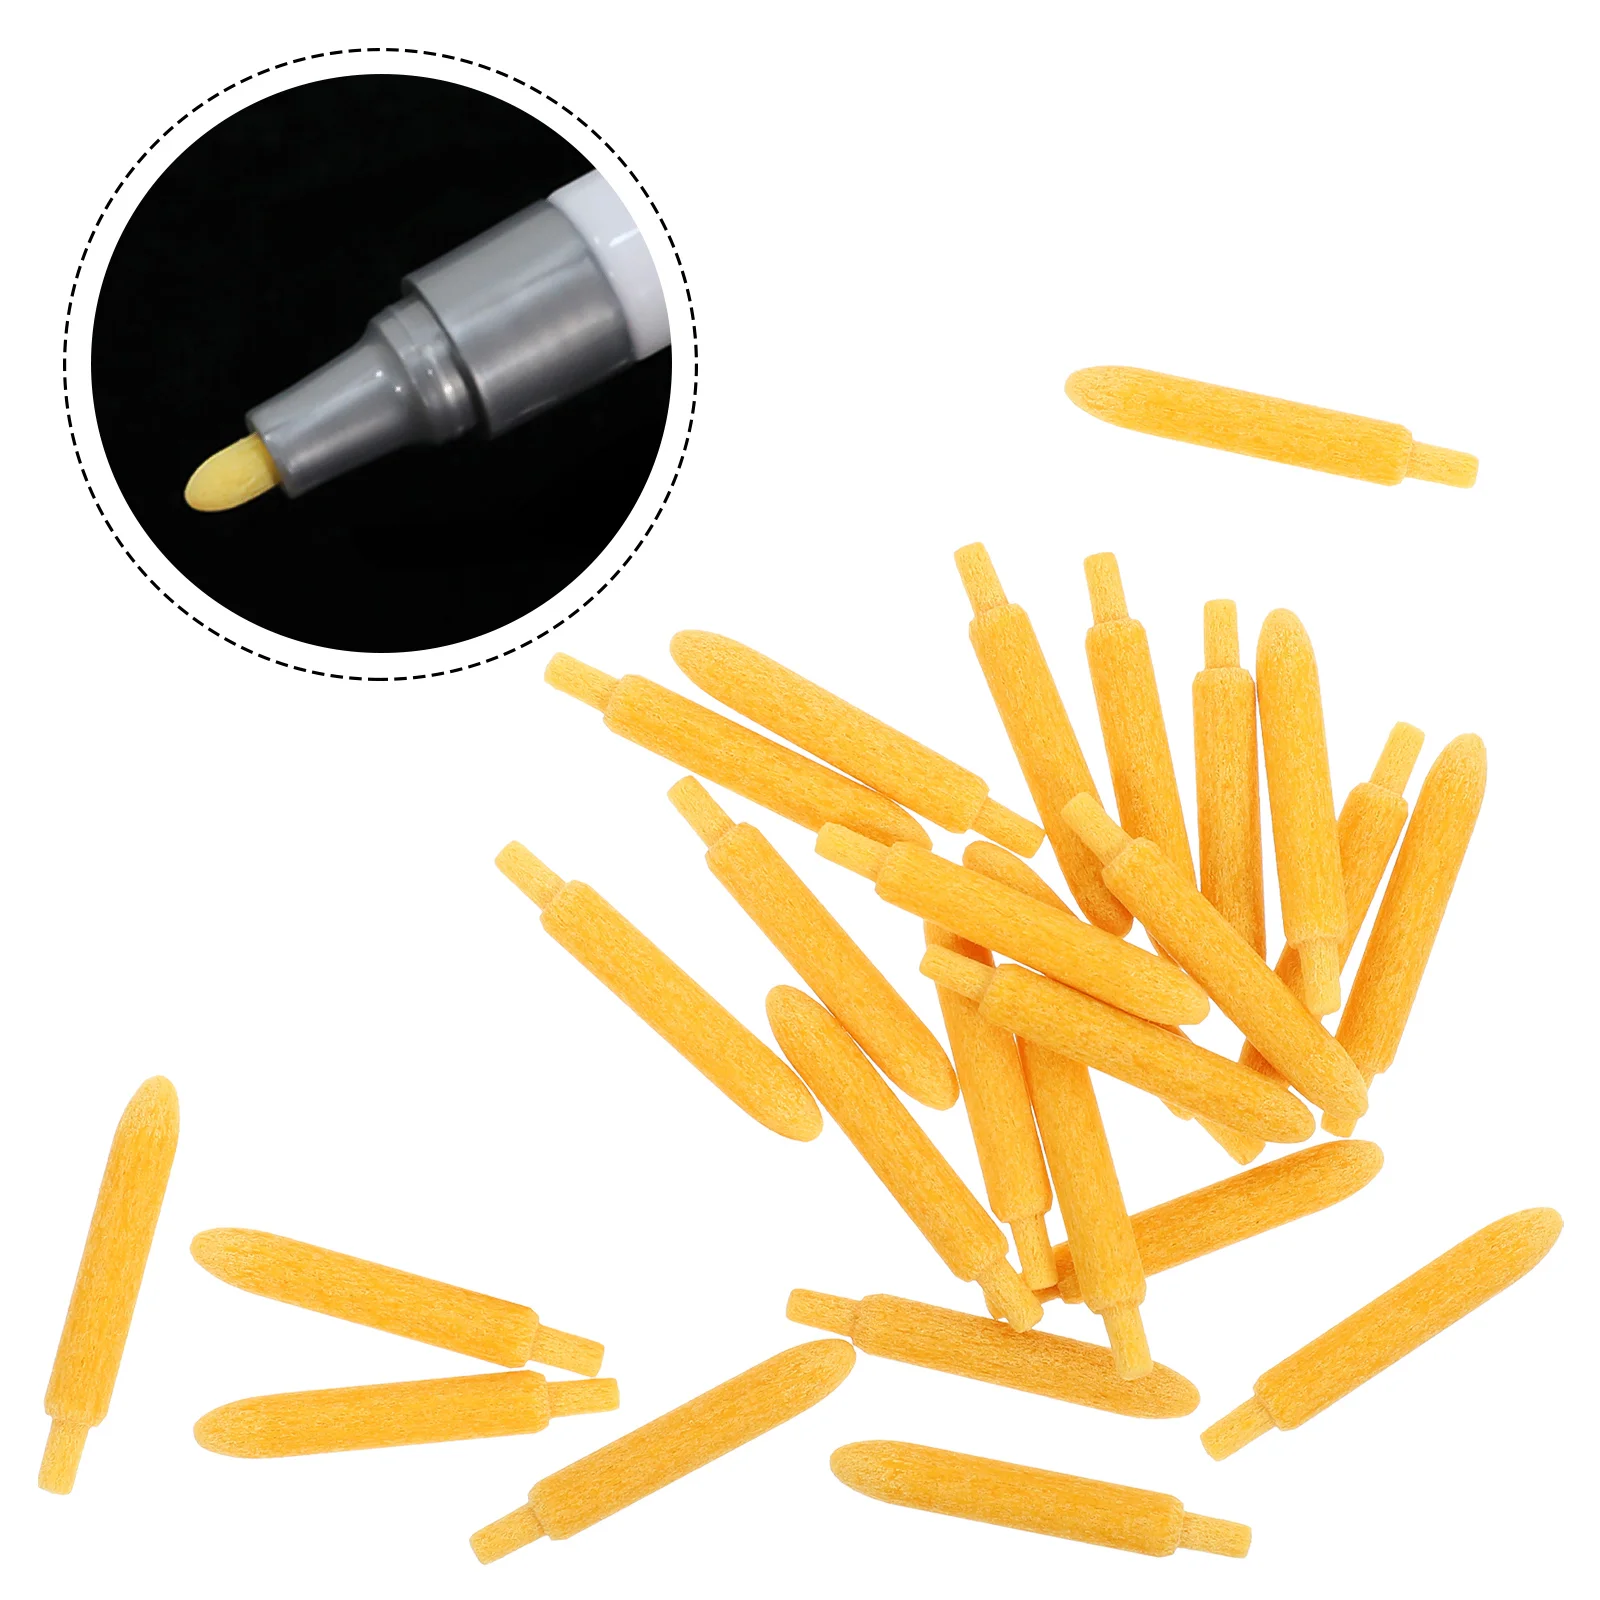 25 Pcs Oil PaintMarker Pen Tips Refill Replacement Polyester Chemical Fiber School Supplies silk screen printing supplies 39t 64um 165cm width 25 50meters polyester bolting cloth